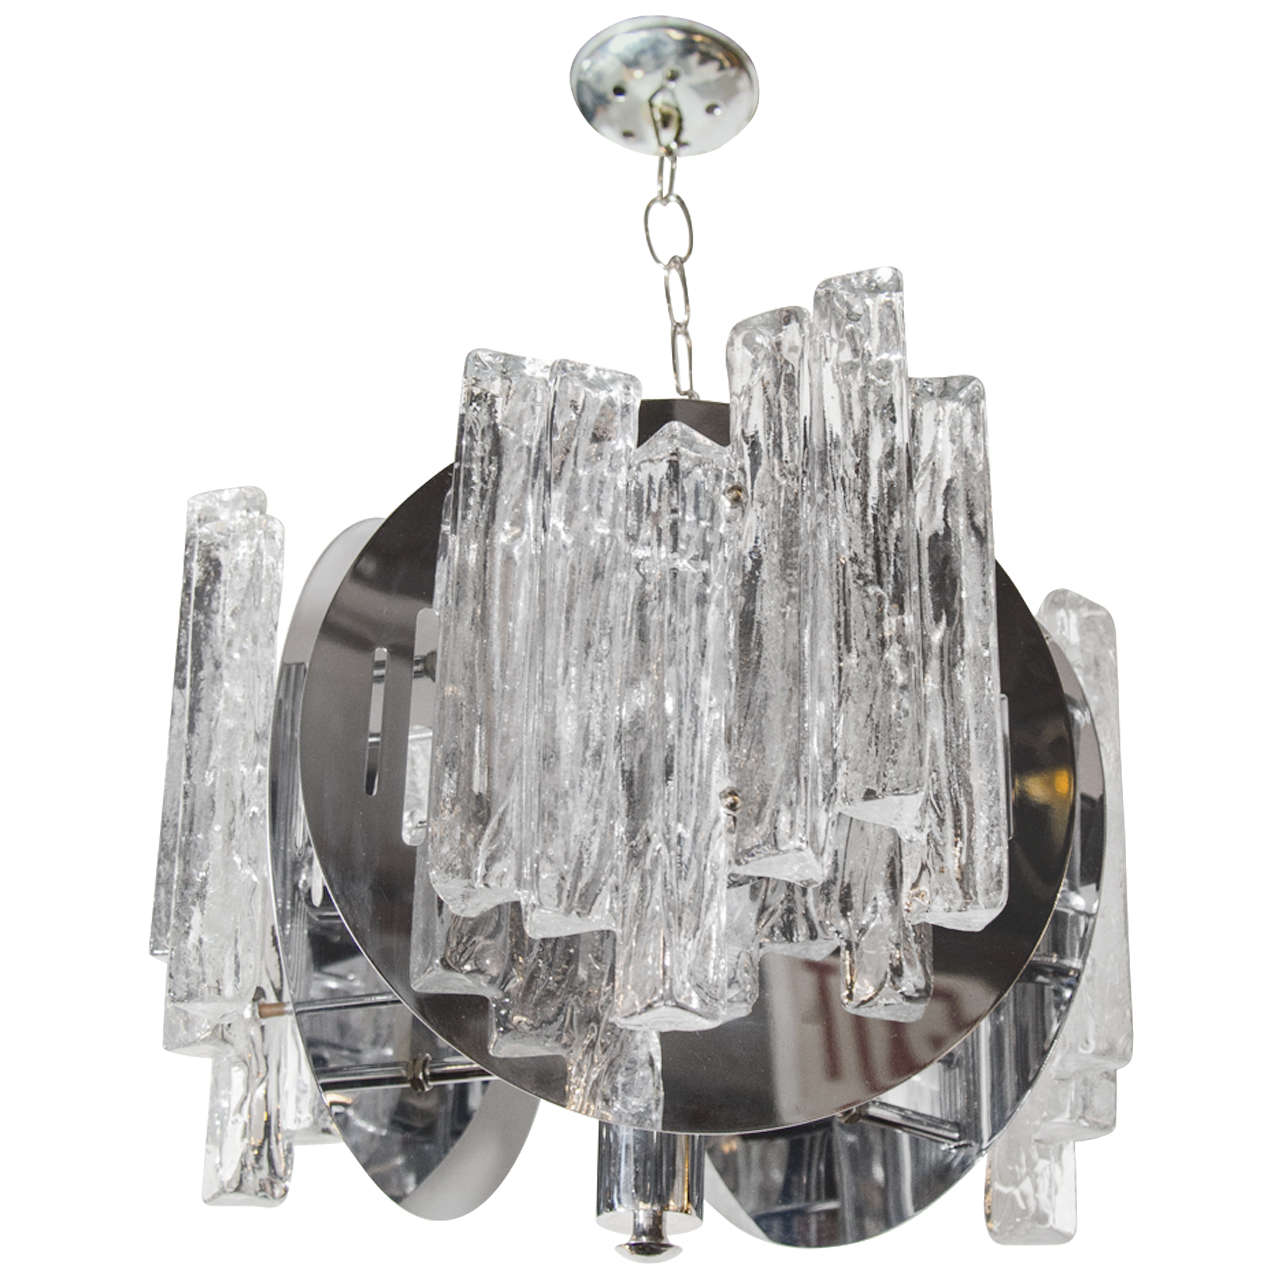 Italian Mid-Century Modern chandelier with Murano glass details and trilateral frame design in nickel and chrome. The fixture has circular discs with open slat accents and are fitted with handblown textured ice glass. Adjustable chain height and